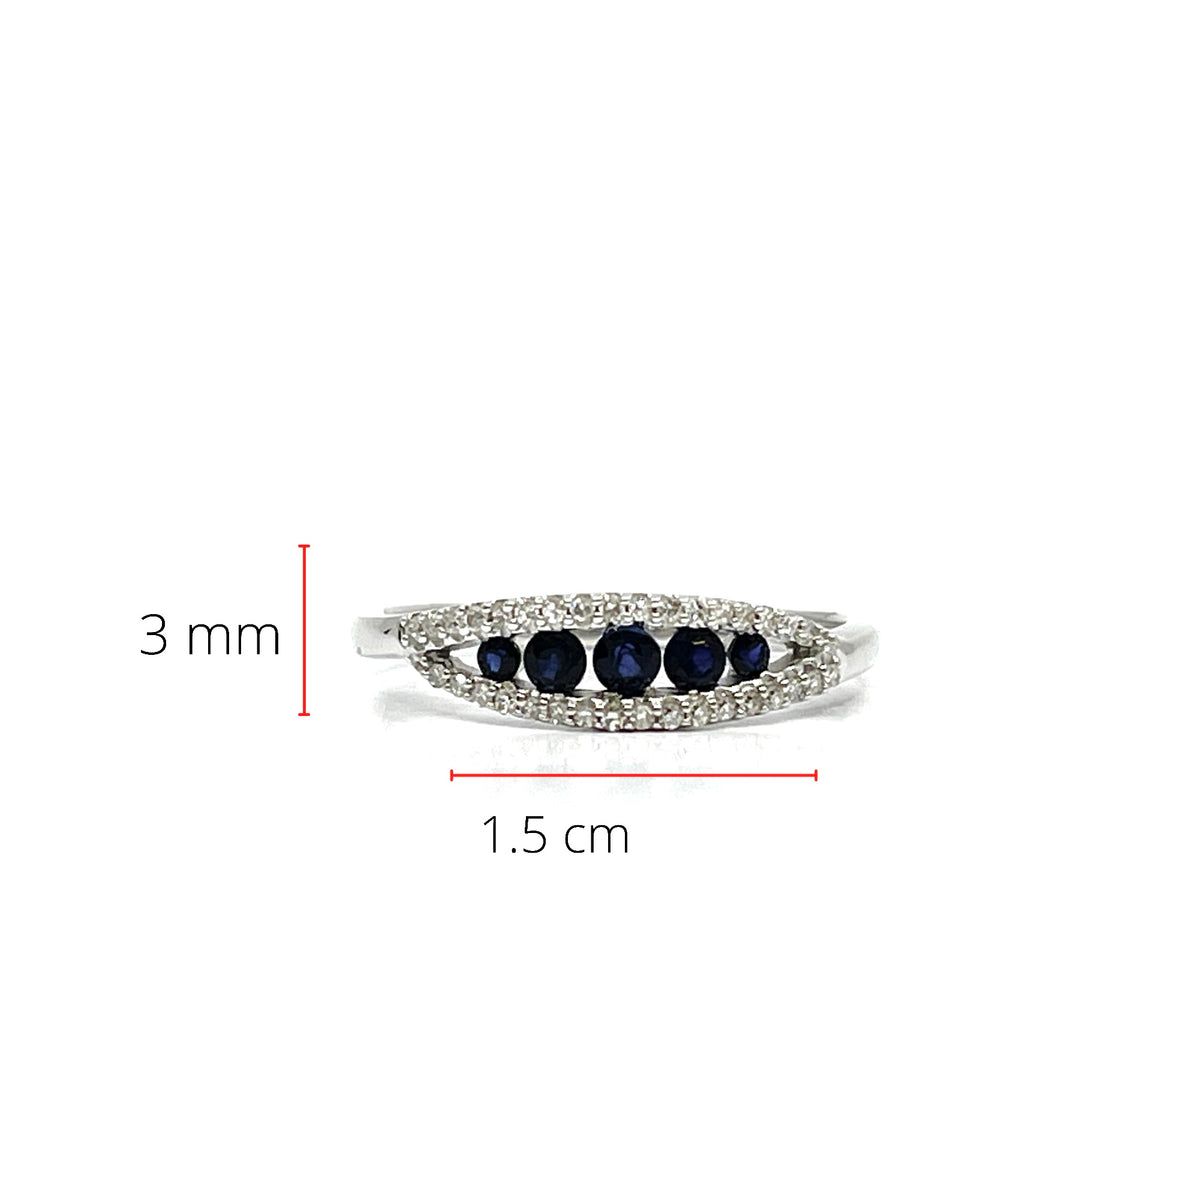 10K White Gold 0.17cttw Sapphire and 0.12cttw Diamond Ring